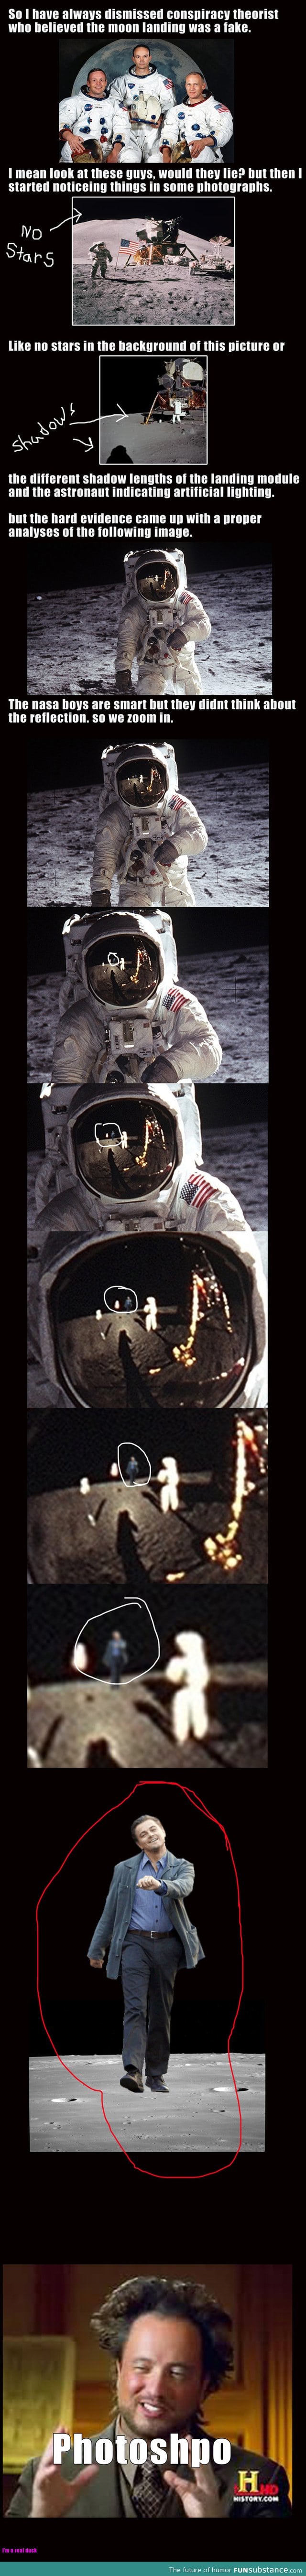 The moon landing was a lie